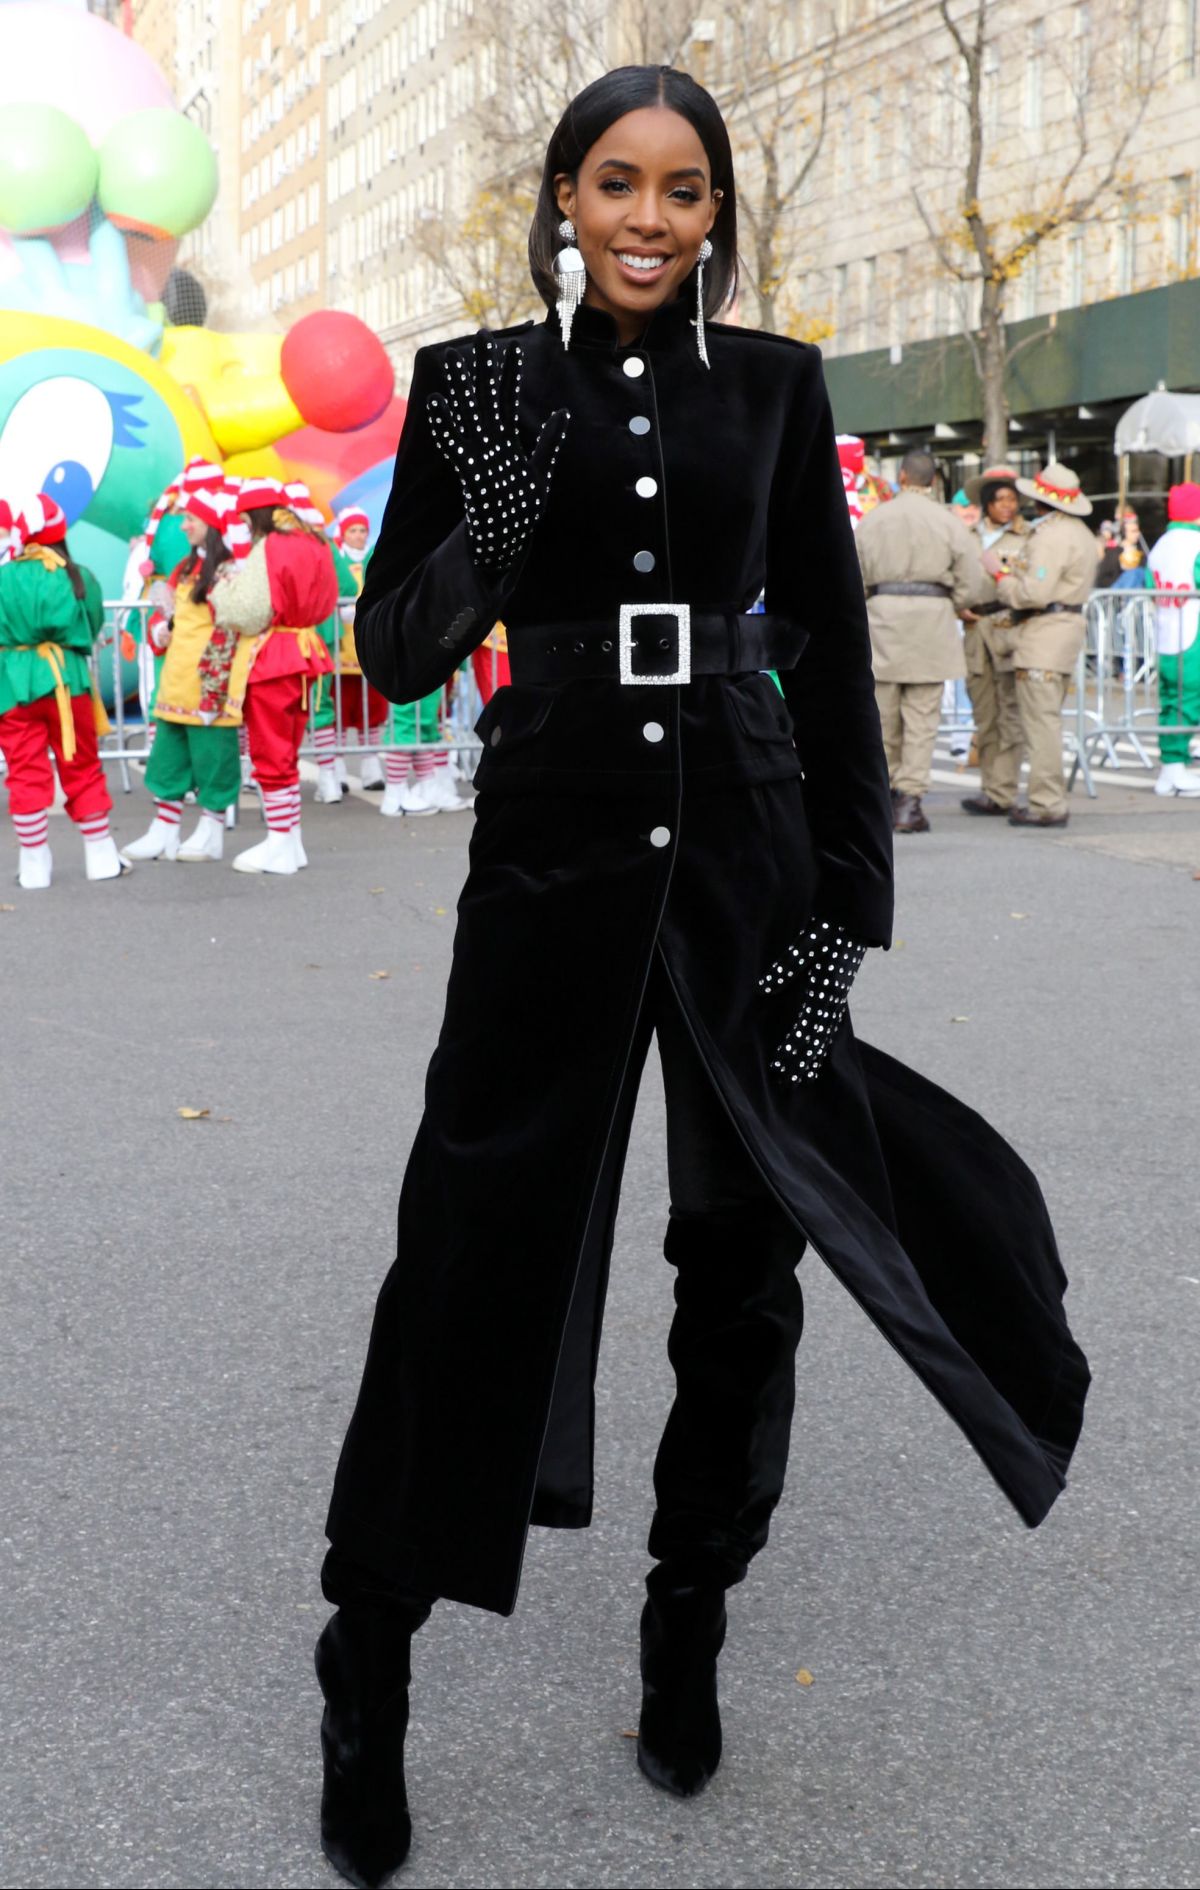 Kelly Rowland Performs @ Macy’s Thanksgiving Day Parade